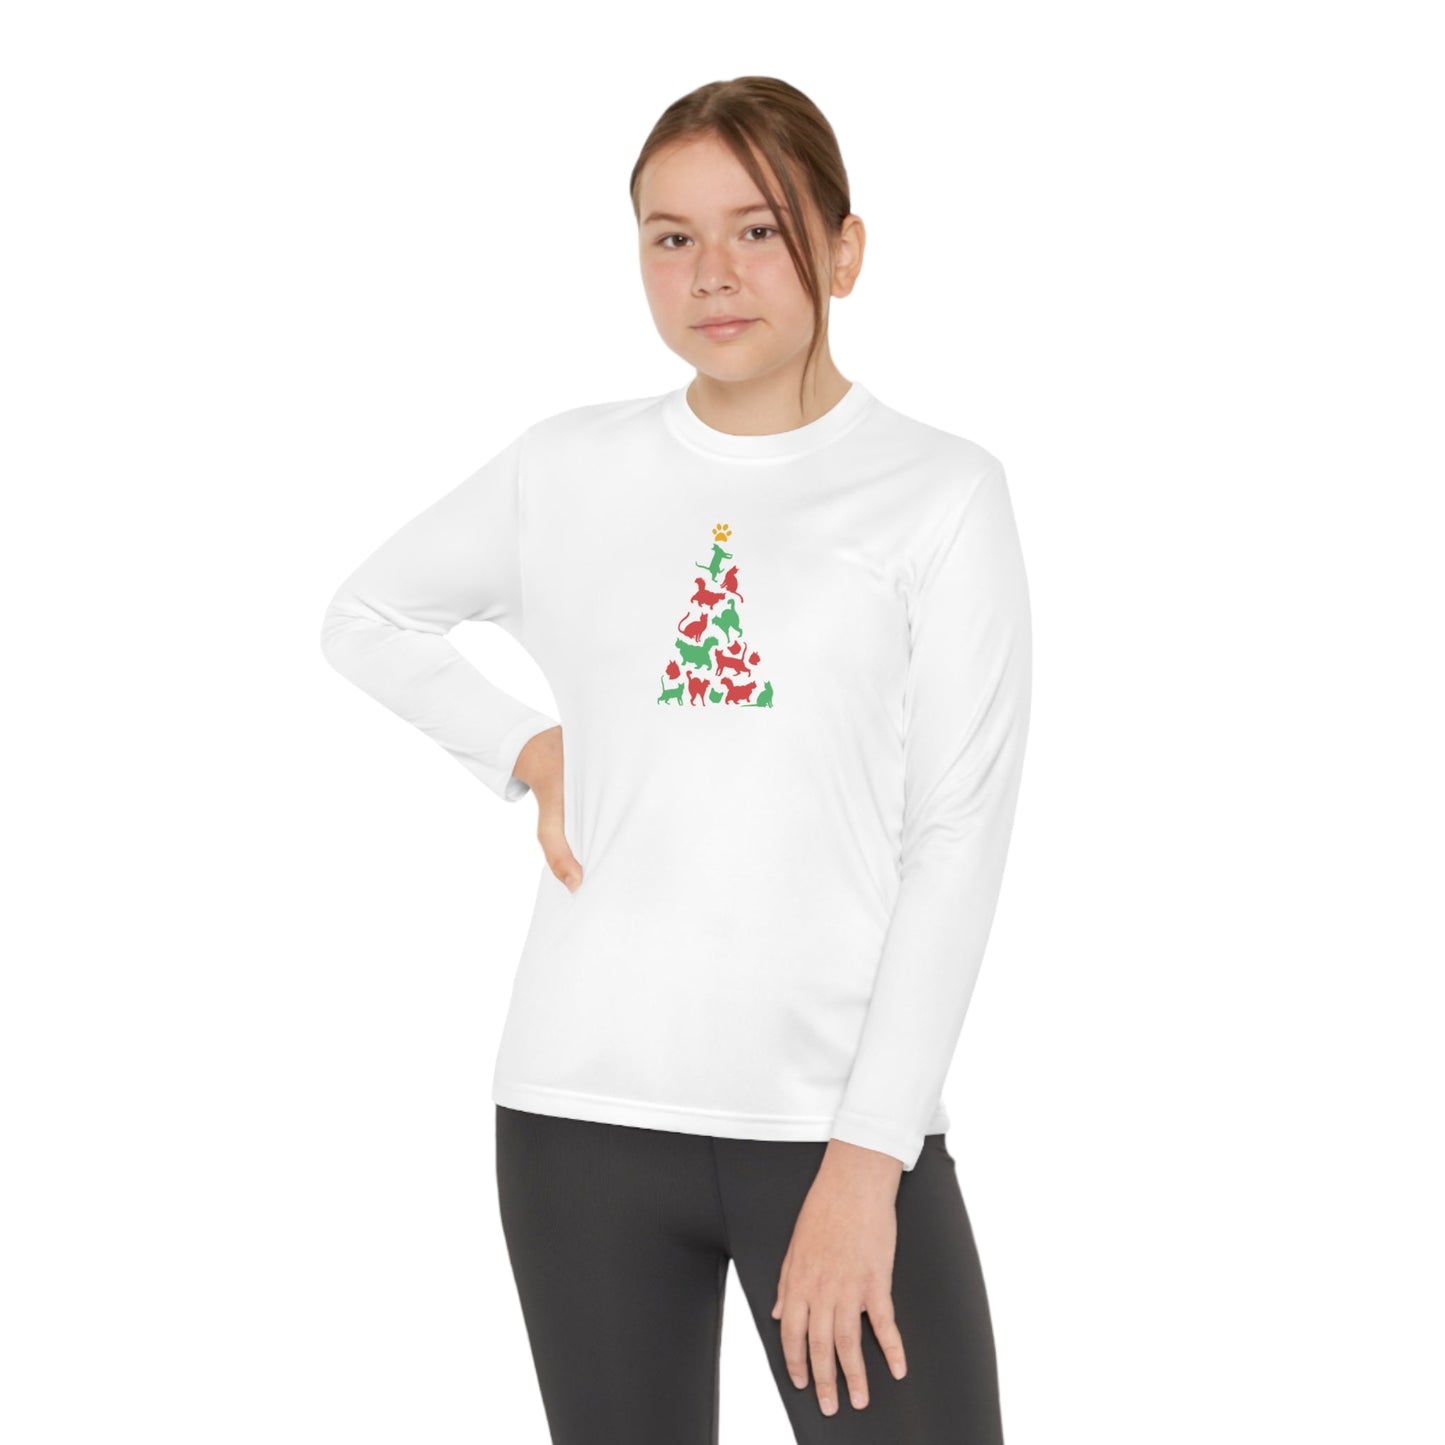 Cat Christmas Tree Youth Long Sleeve Competitor Tee - Kids clothes - Epileptic Al’s Shop